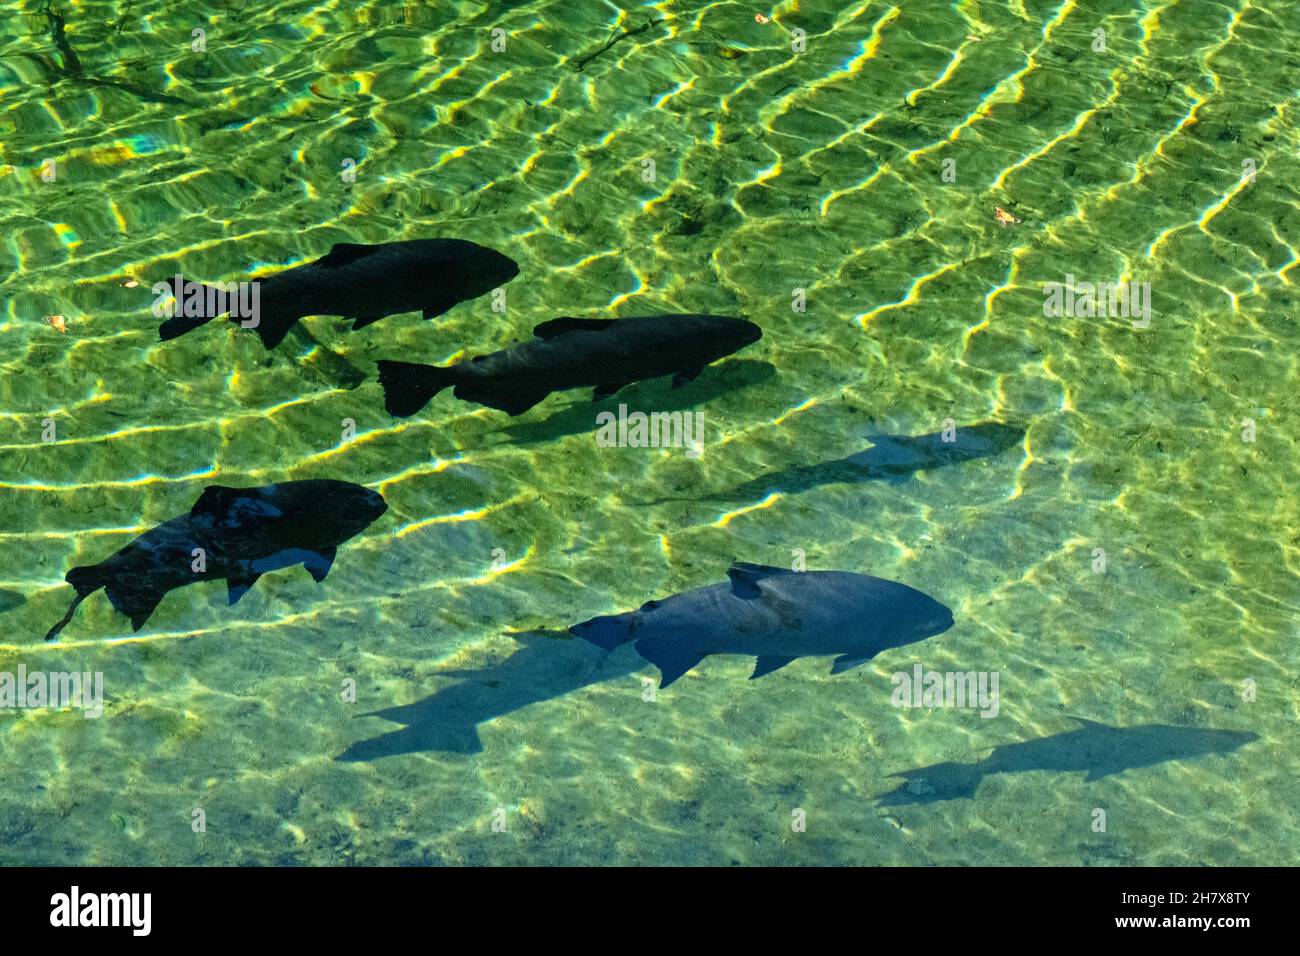 Florida state freshwater fish hi-res stock photography and images - Alamy